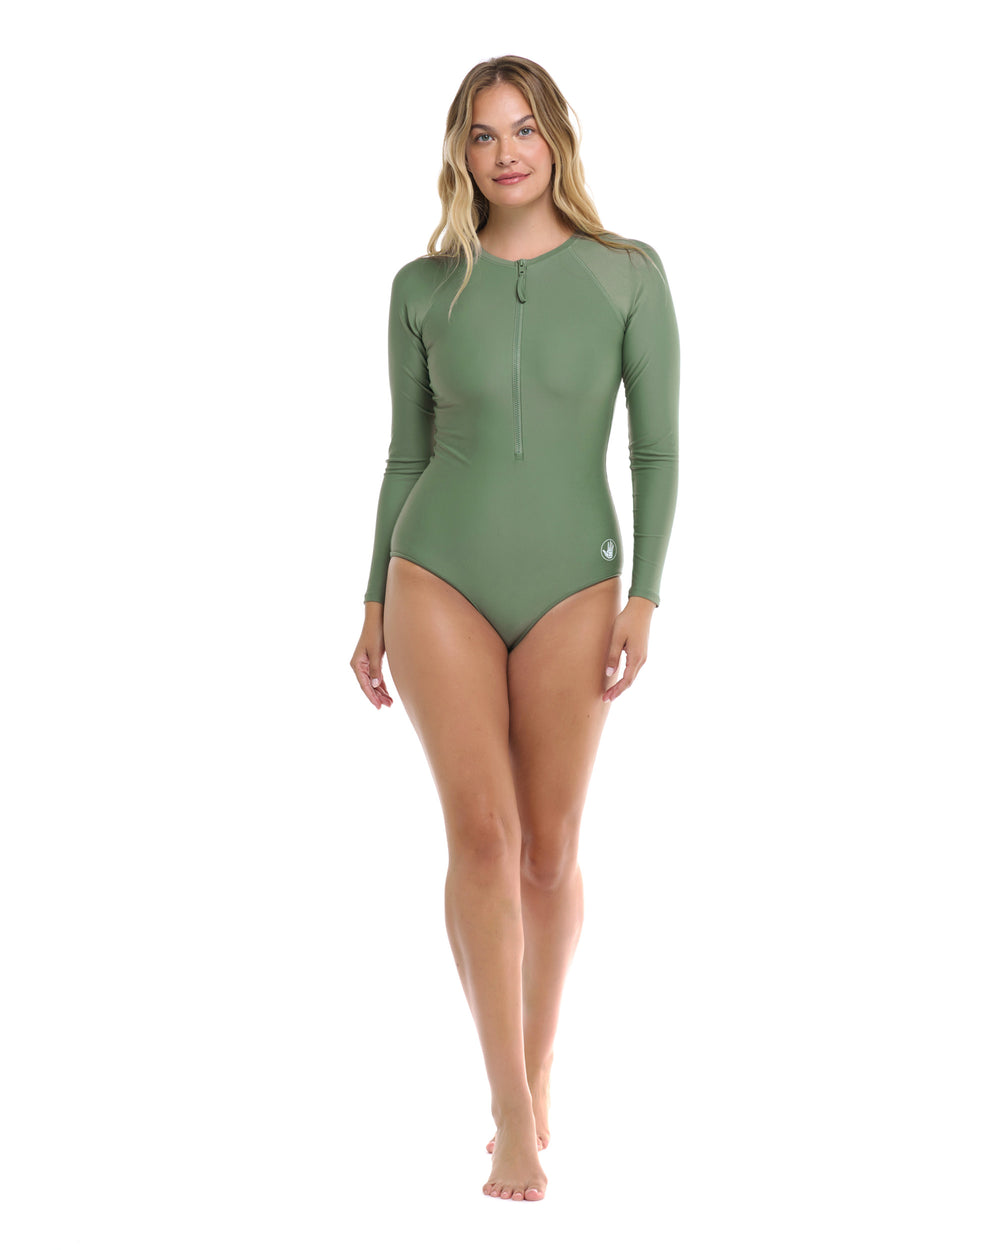 Chanel Paddle Suit One Piece